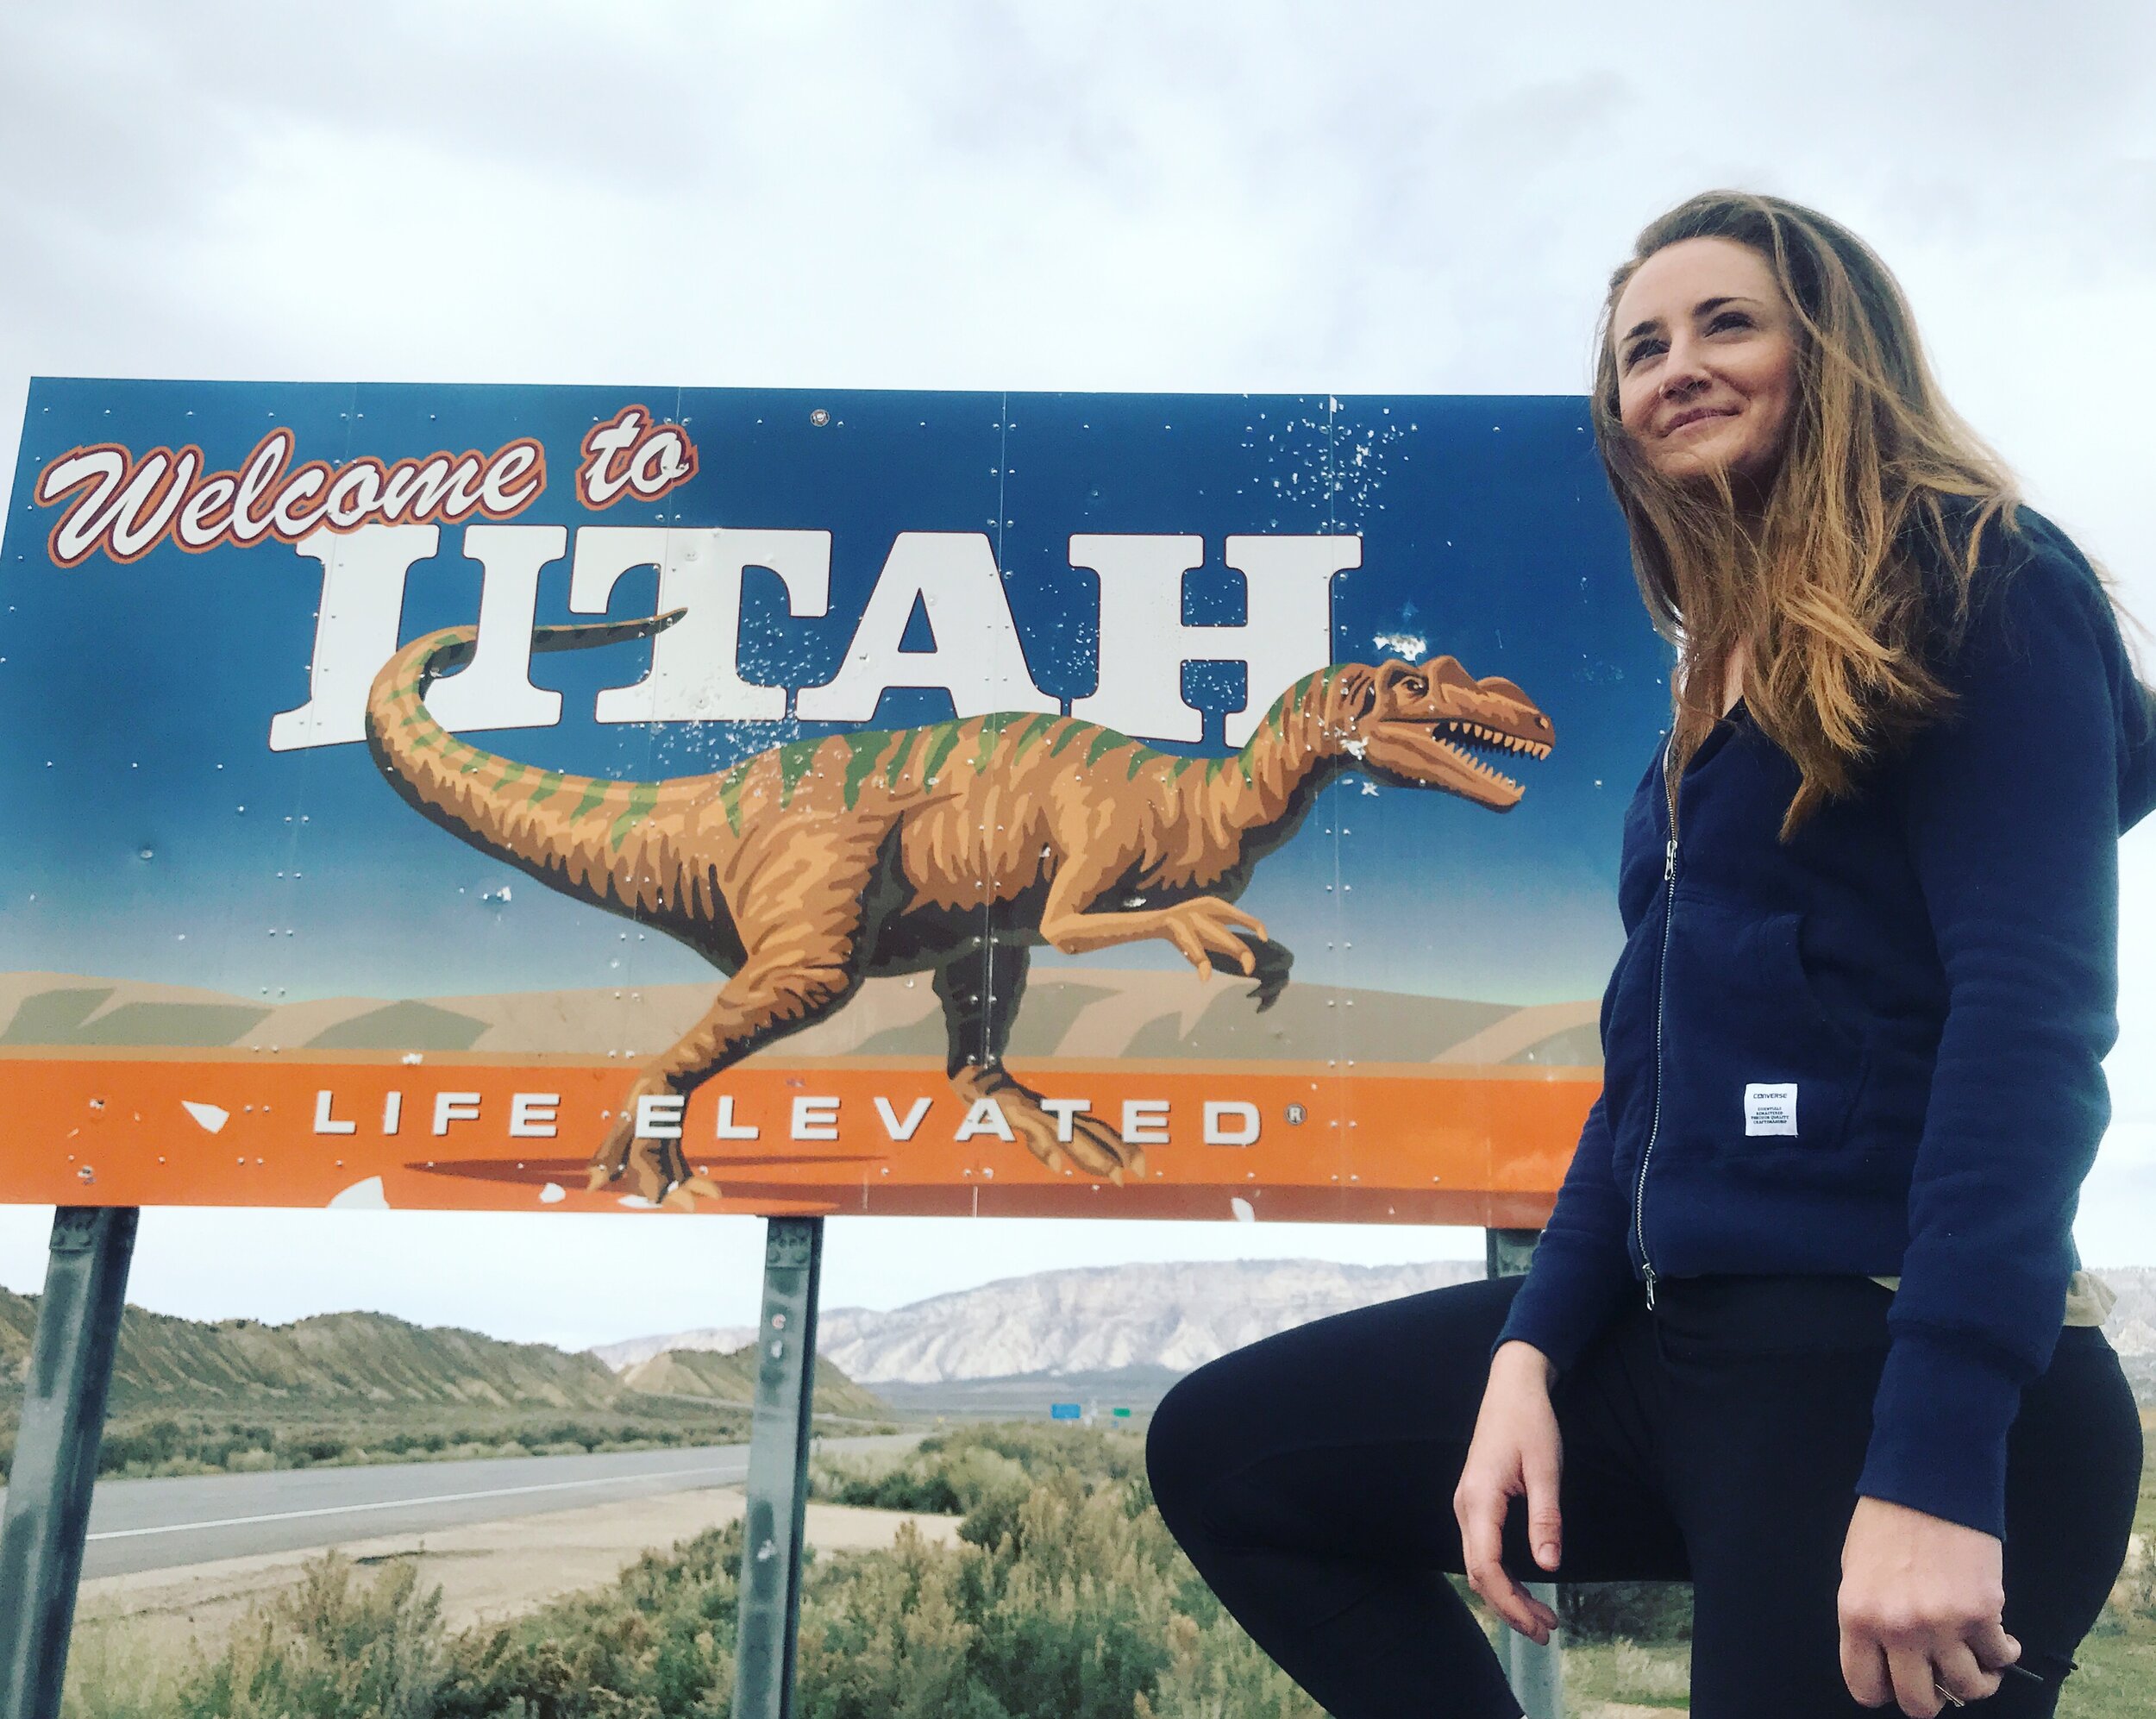 Michelle Wax on the border of Colorado and Utah